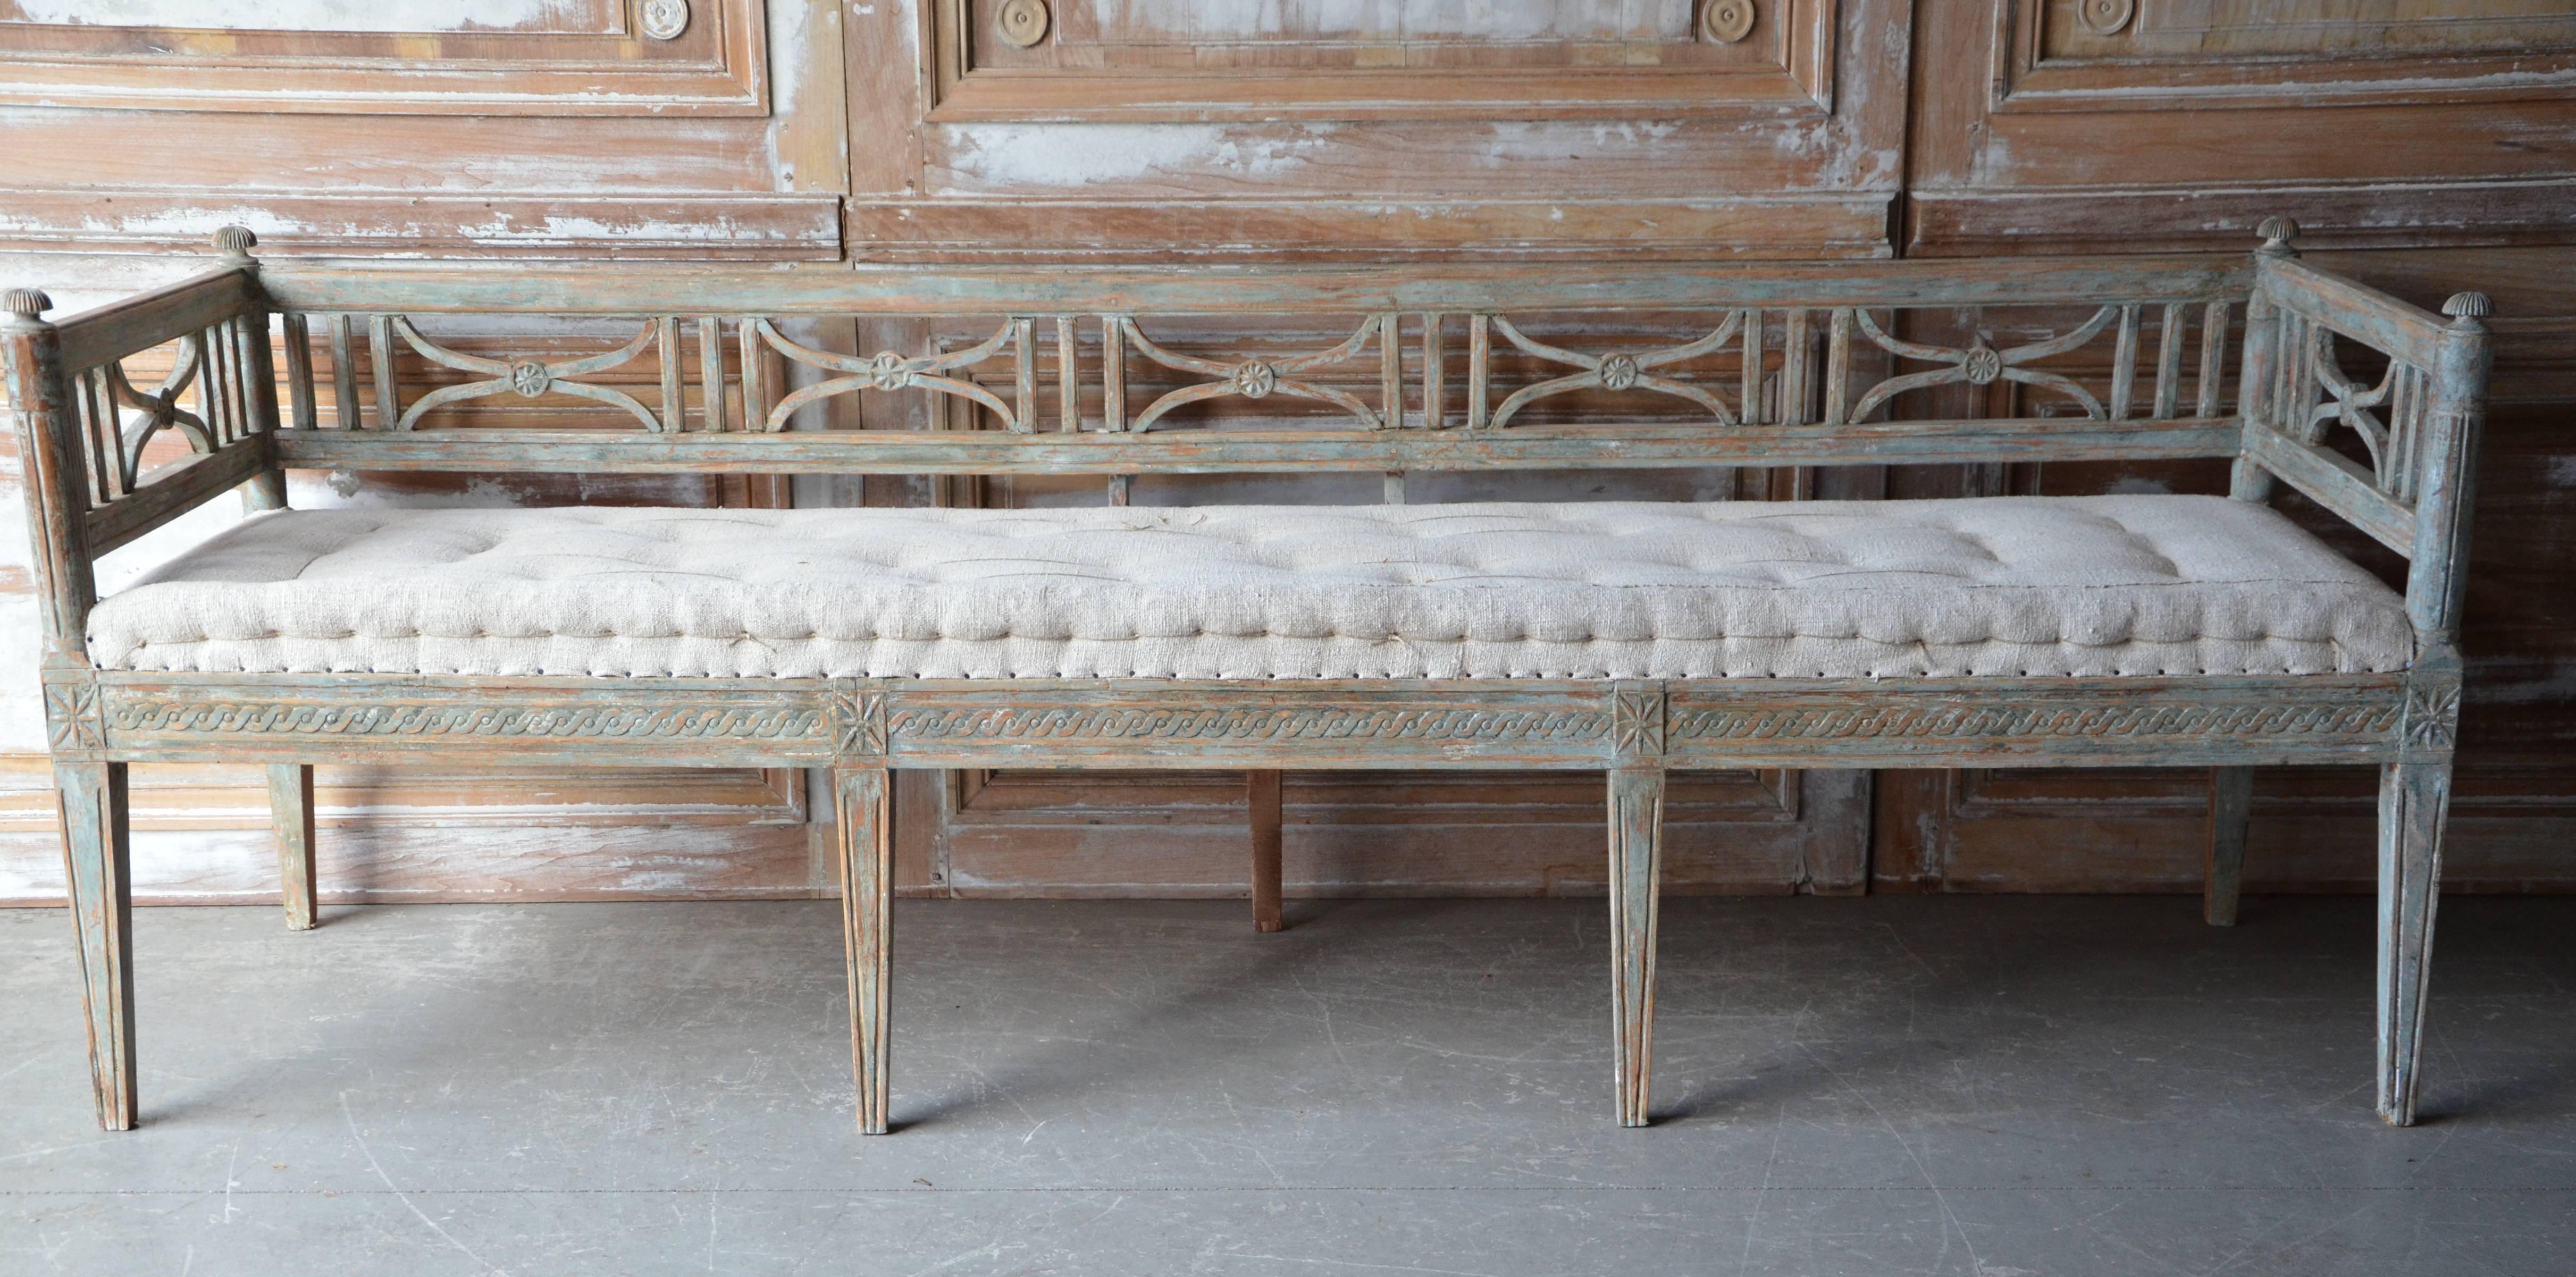 Beautifully carved early 19th century Swedish Gustavian period sofa bench in lovely original blue color and patina upholstered with antique hand-loomed linen,
Gotland, Sweden, circa 1810.

More than ever, we selected the best, the rarest, the